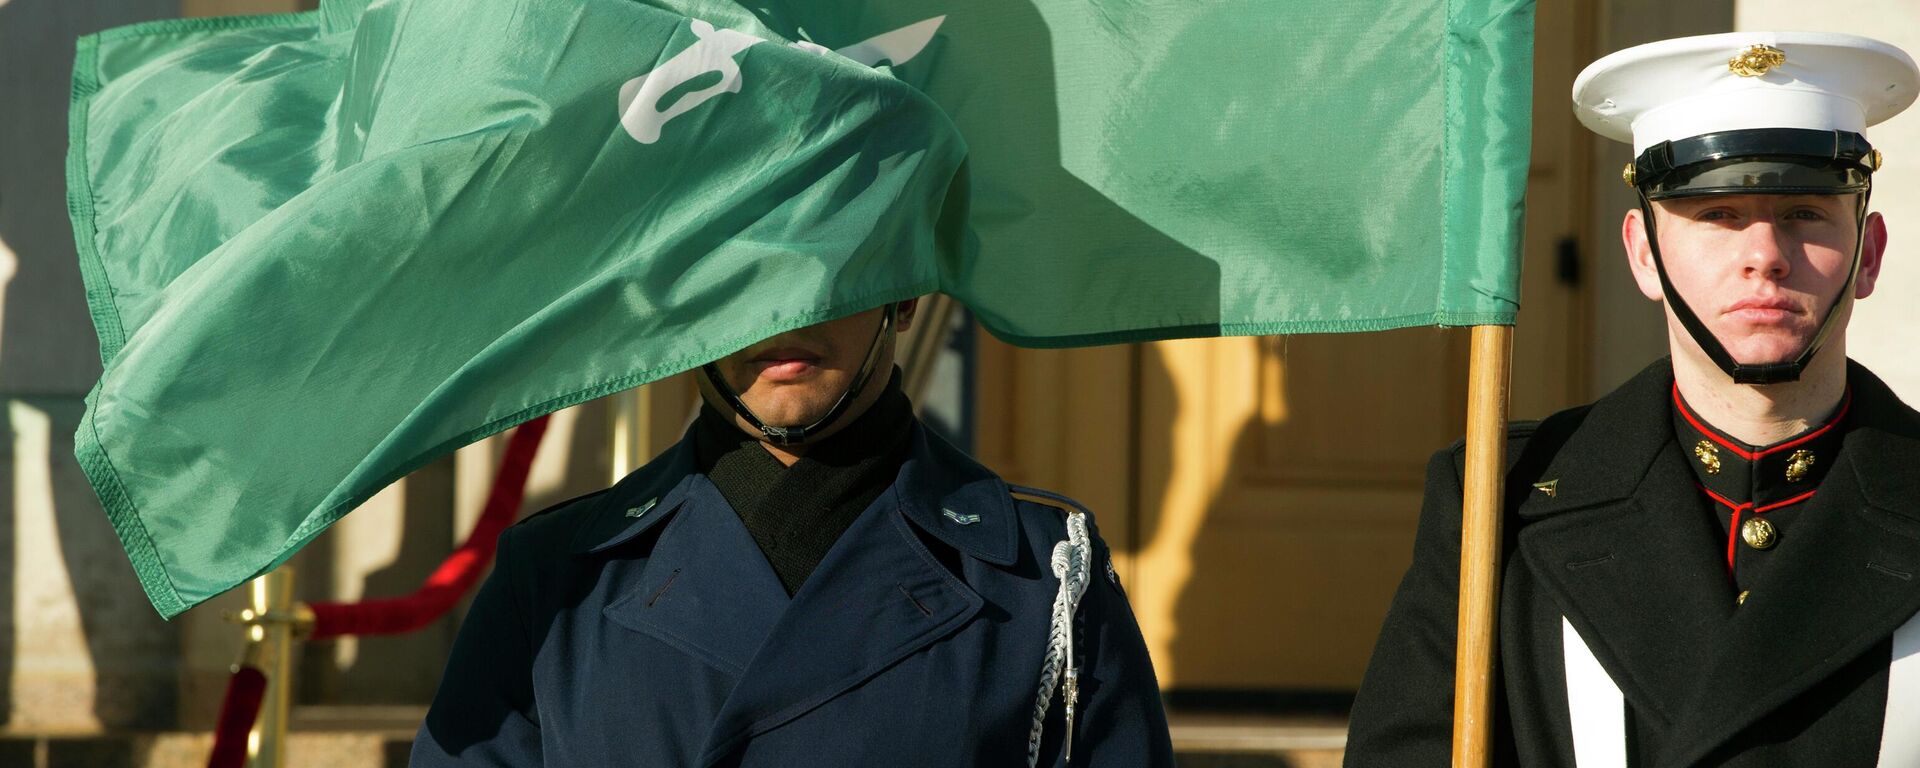 FILE - In this March 22, 2018 file photo, an honor guard member is covered by the flag of Saudi Arabia as Defense Secretary Jim Mattis welcomes Saudi Crown Prince Mohammed bin Salman to the Pentagon, in Washington  - Sputnik International, 1920, 11.07.2022